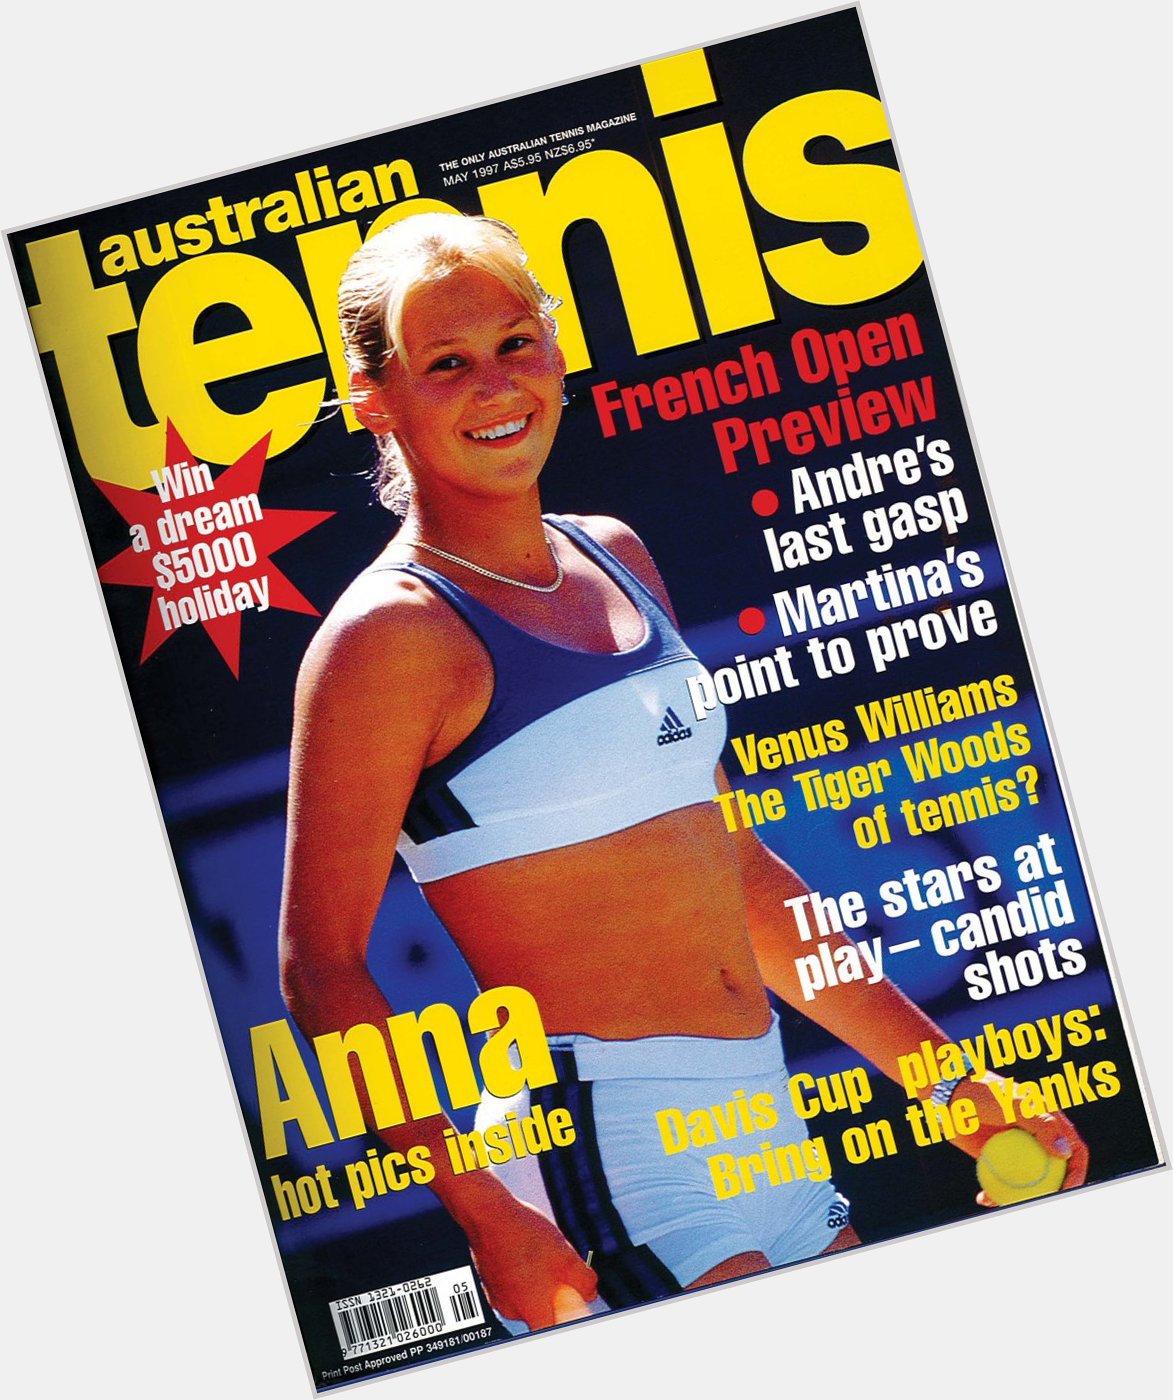 Happy birthday today to Anna Kournikova - a 12-time cover star between 1996-2003! 